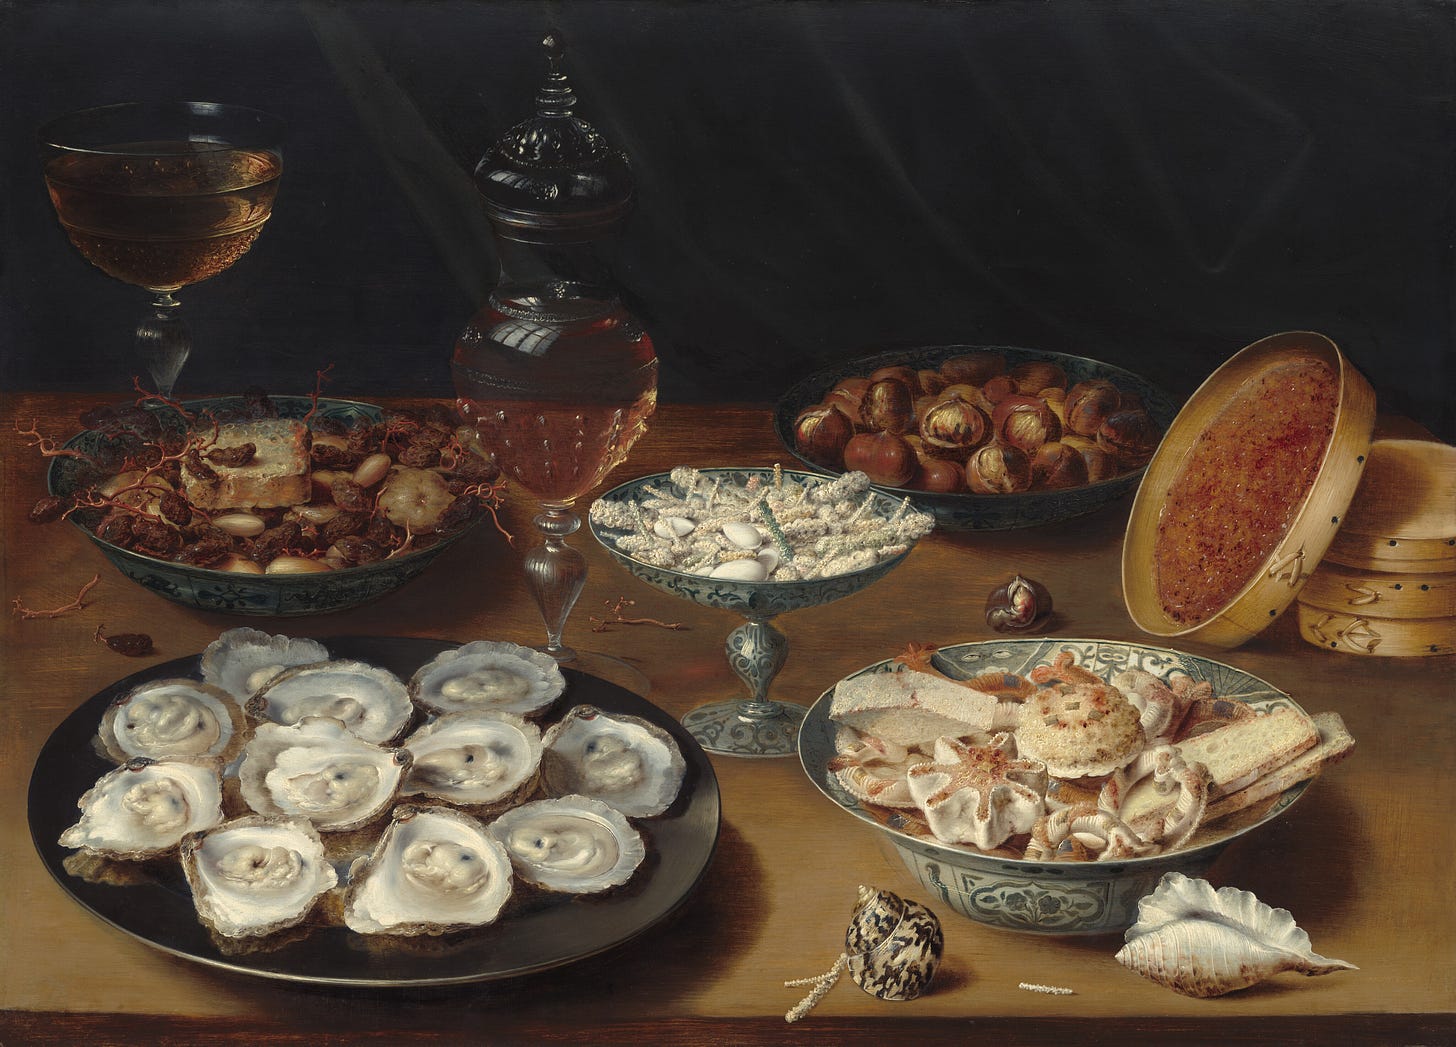 Dishes with Oysters, Fruit, and Wine, c. 1620/1625 by Osias Beert the Elder